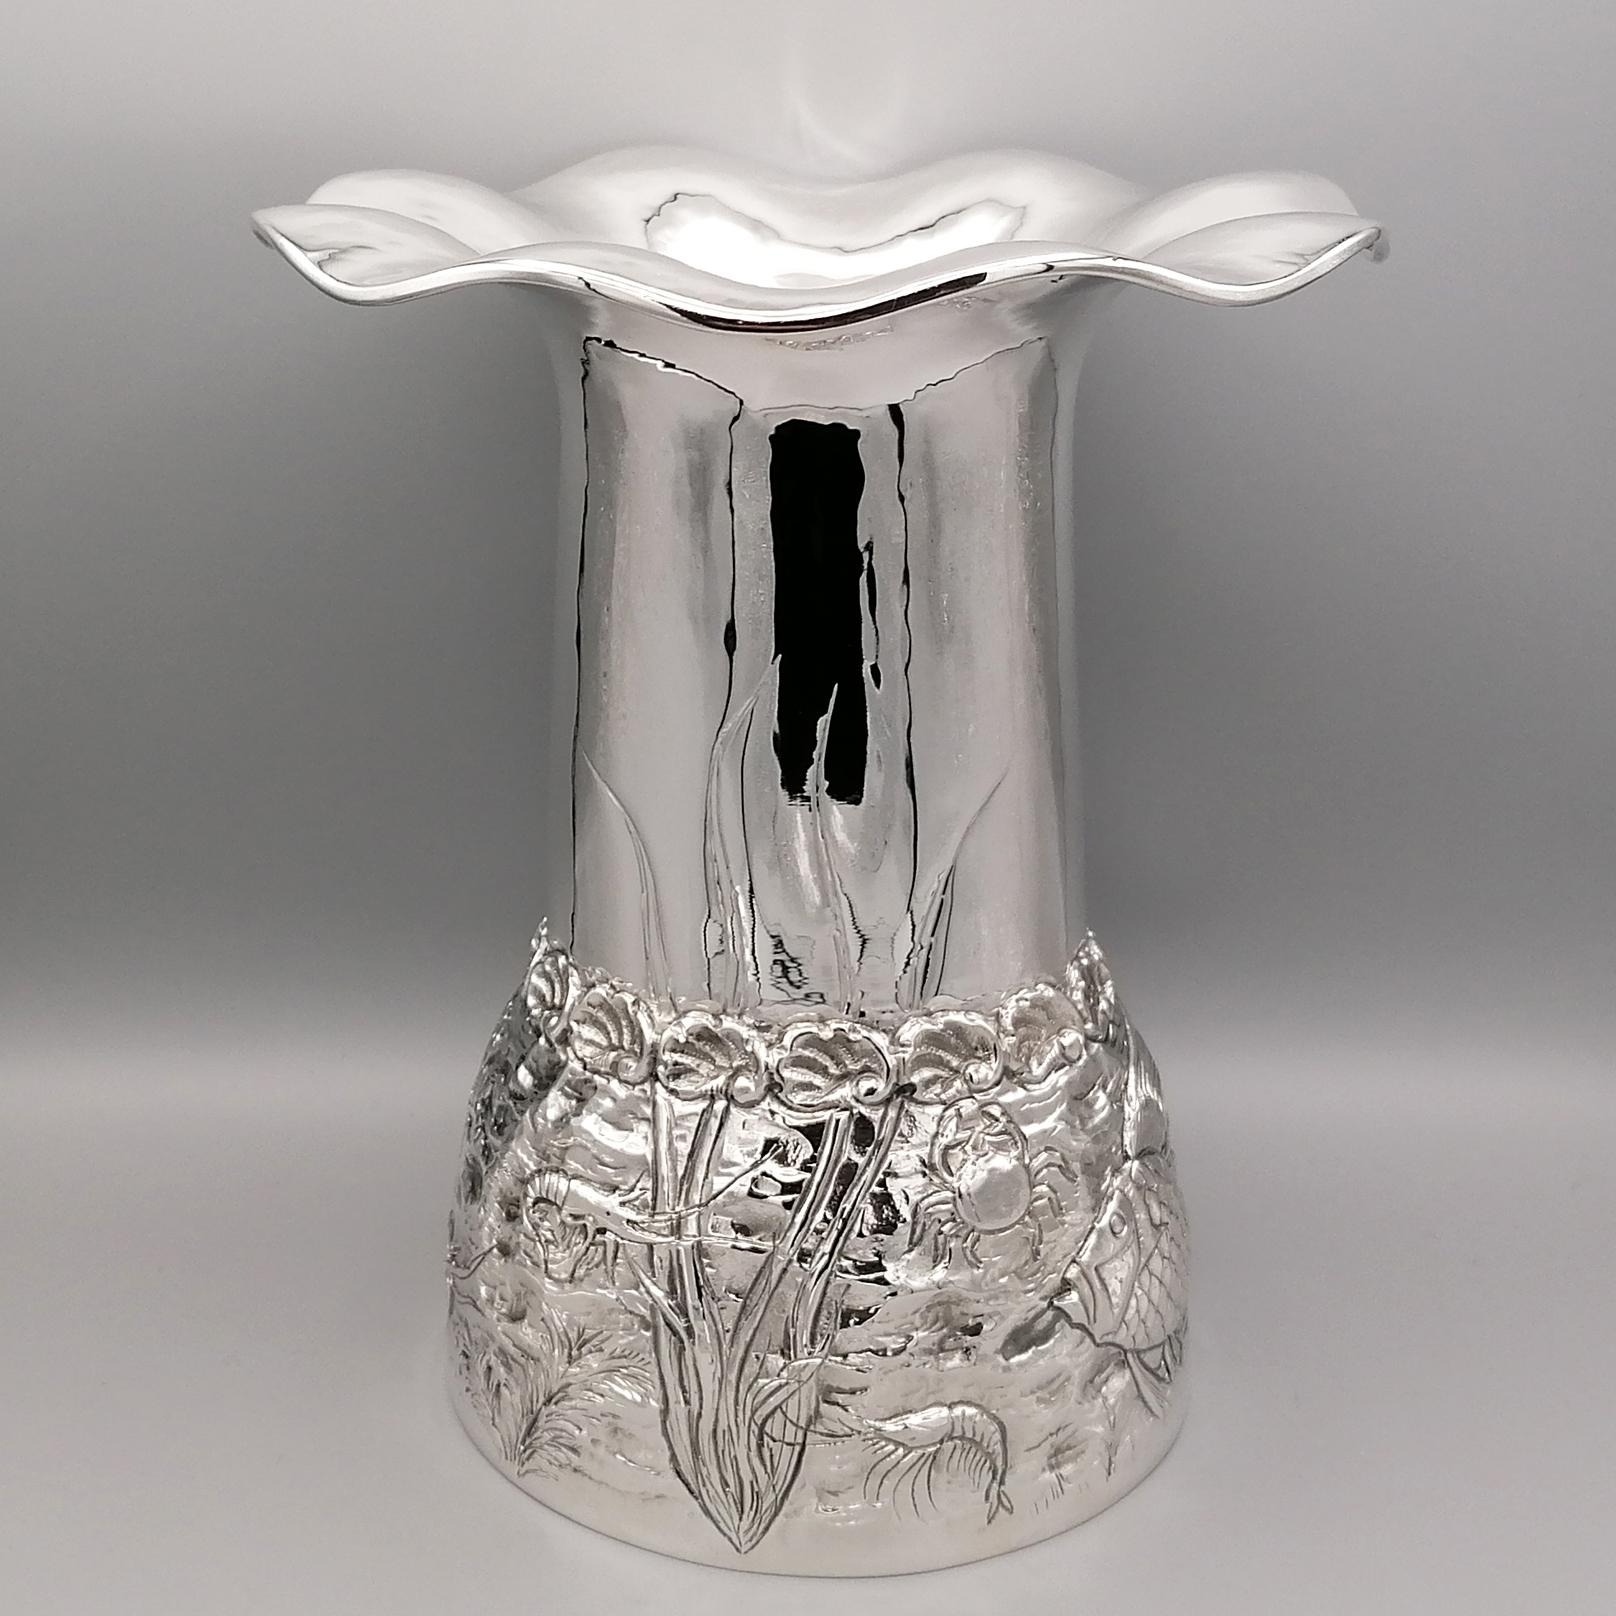 800 solid silver vase completely handmade.
The body is cylindrical in the upper part while towards the base it widens due to the overhang and chisel. The chosen subject is the sea.
Fish, shrimp, crabs and marine flora that swim and float in the